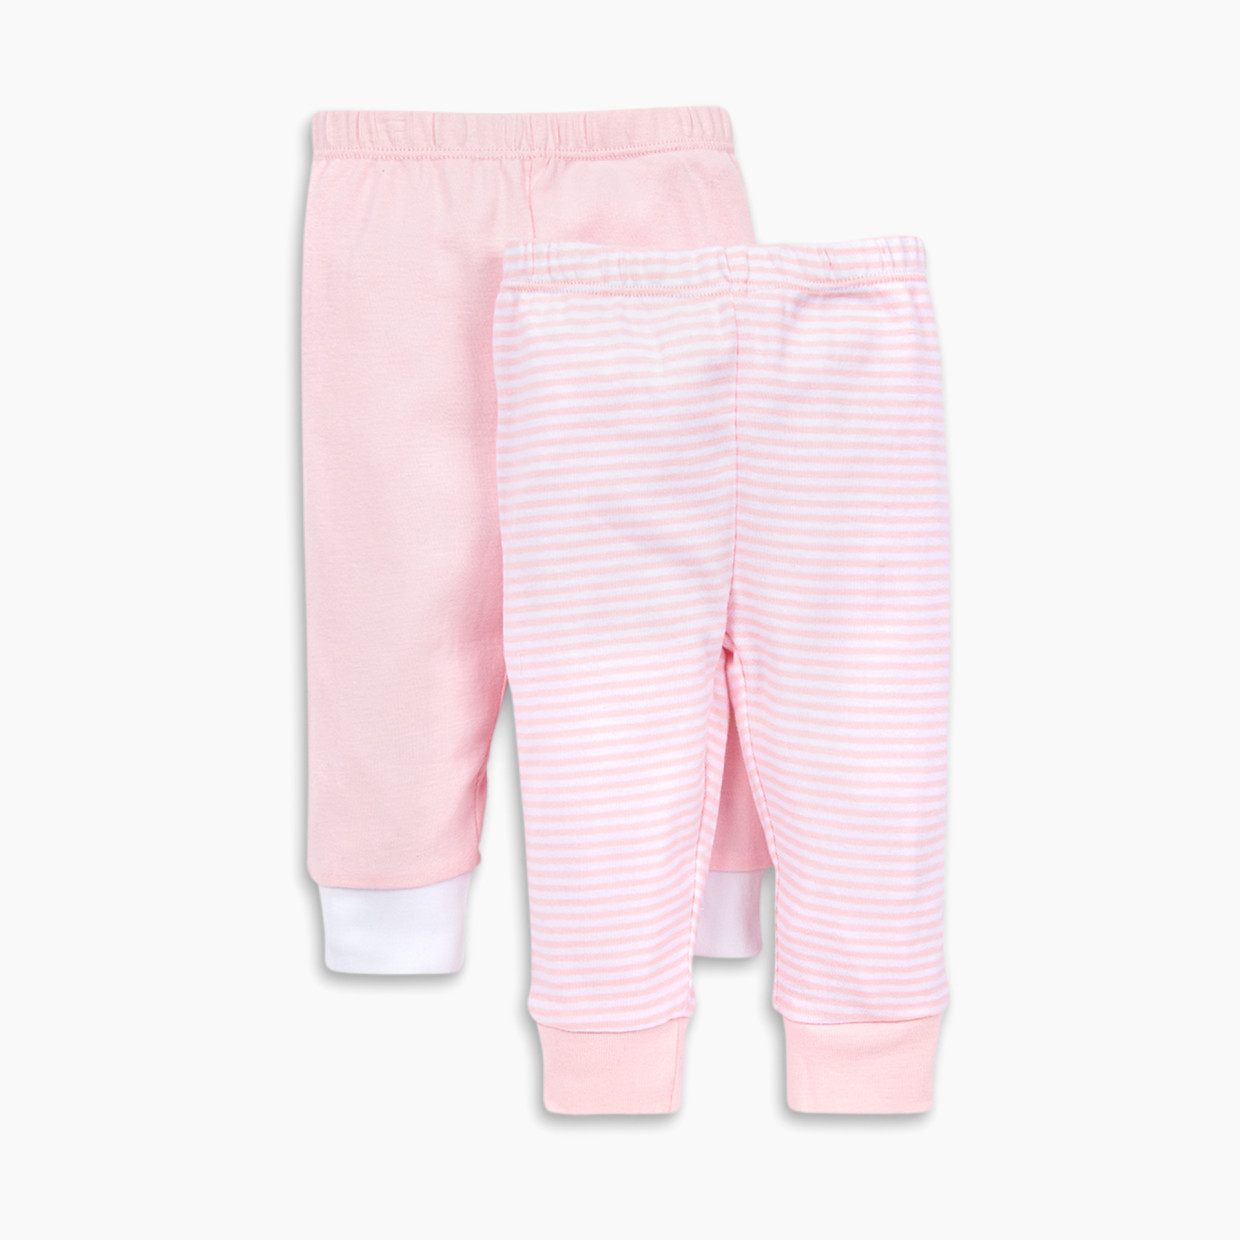 Burt's Bees Baby Organic Footless Pants (2 Pack) - Blossom, 6-9 Months.